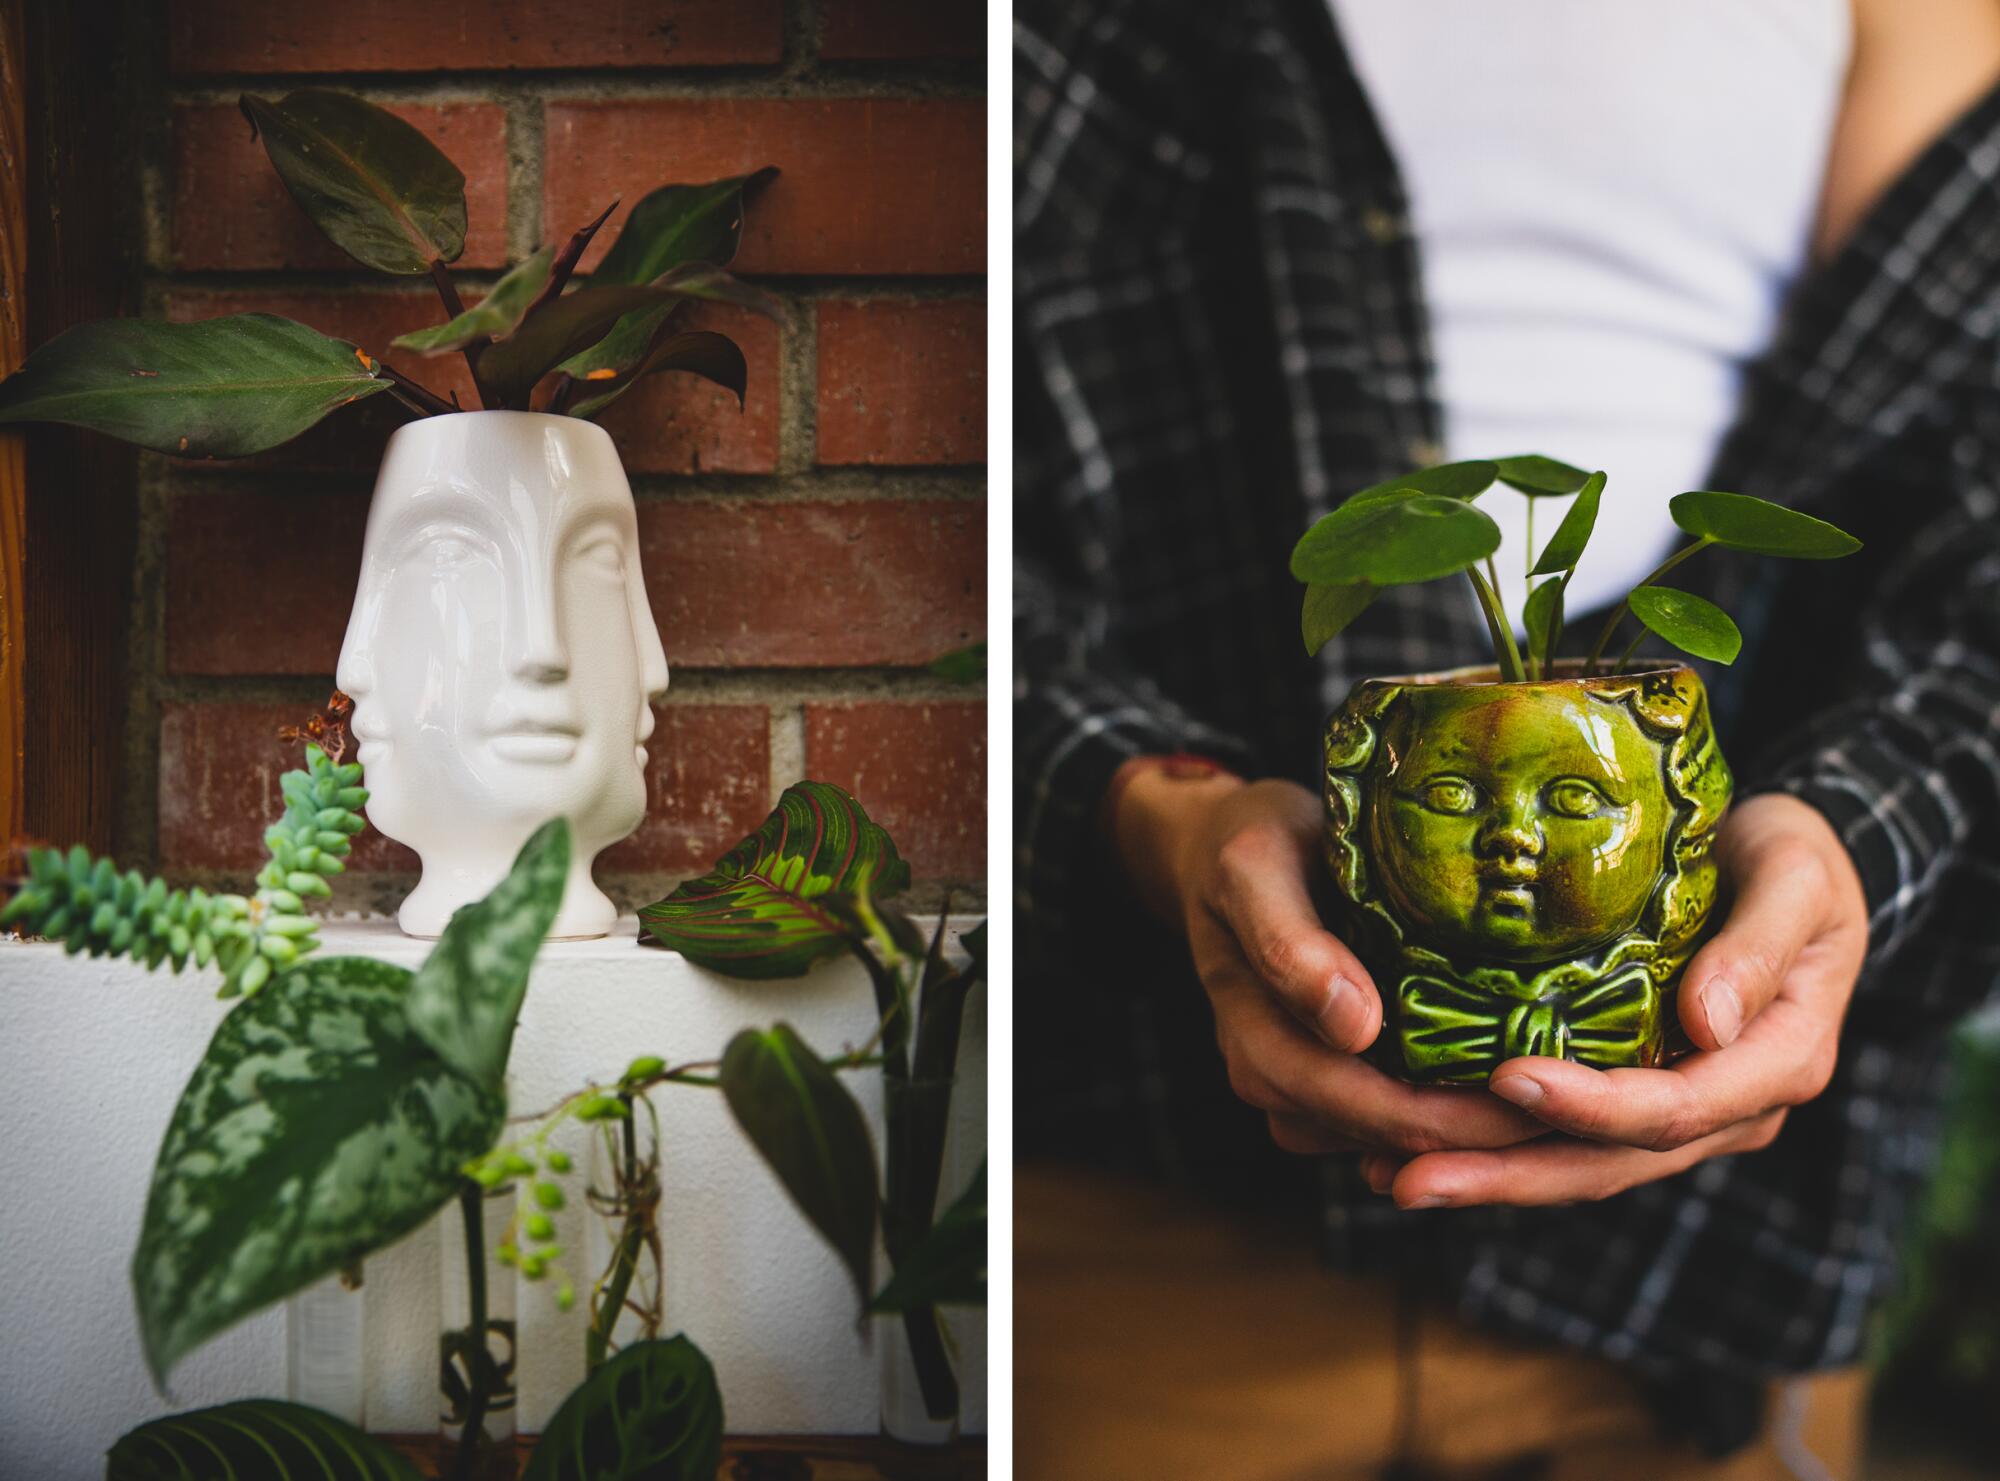 Two face-shaped pots, one white and one green, hold plants.